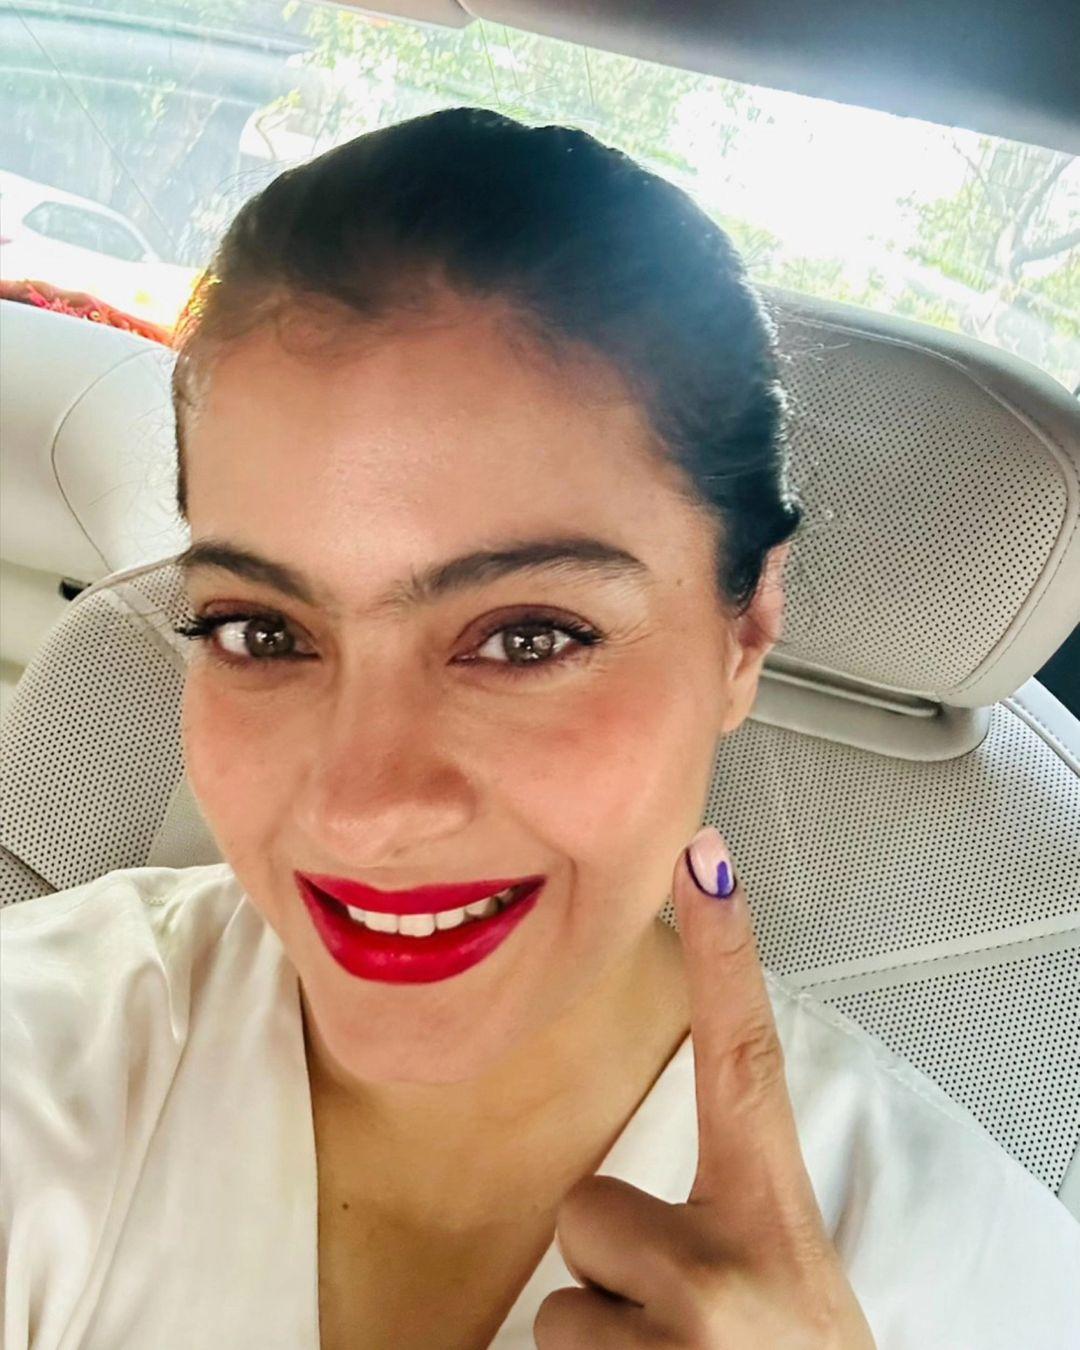 Kajol dropped a picture of herself after casting vote